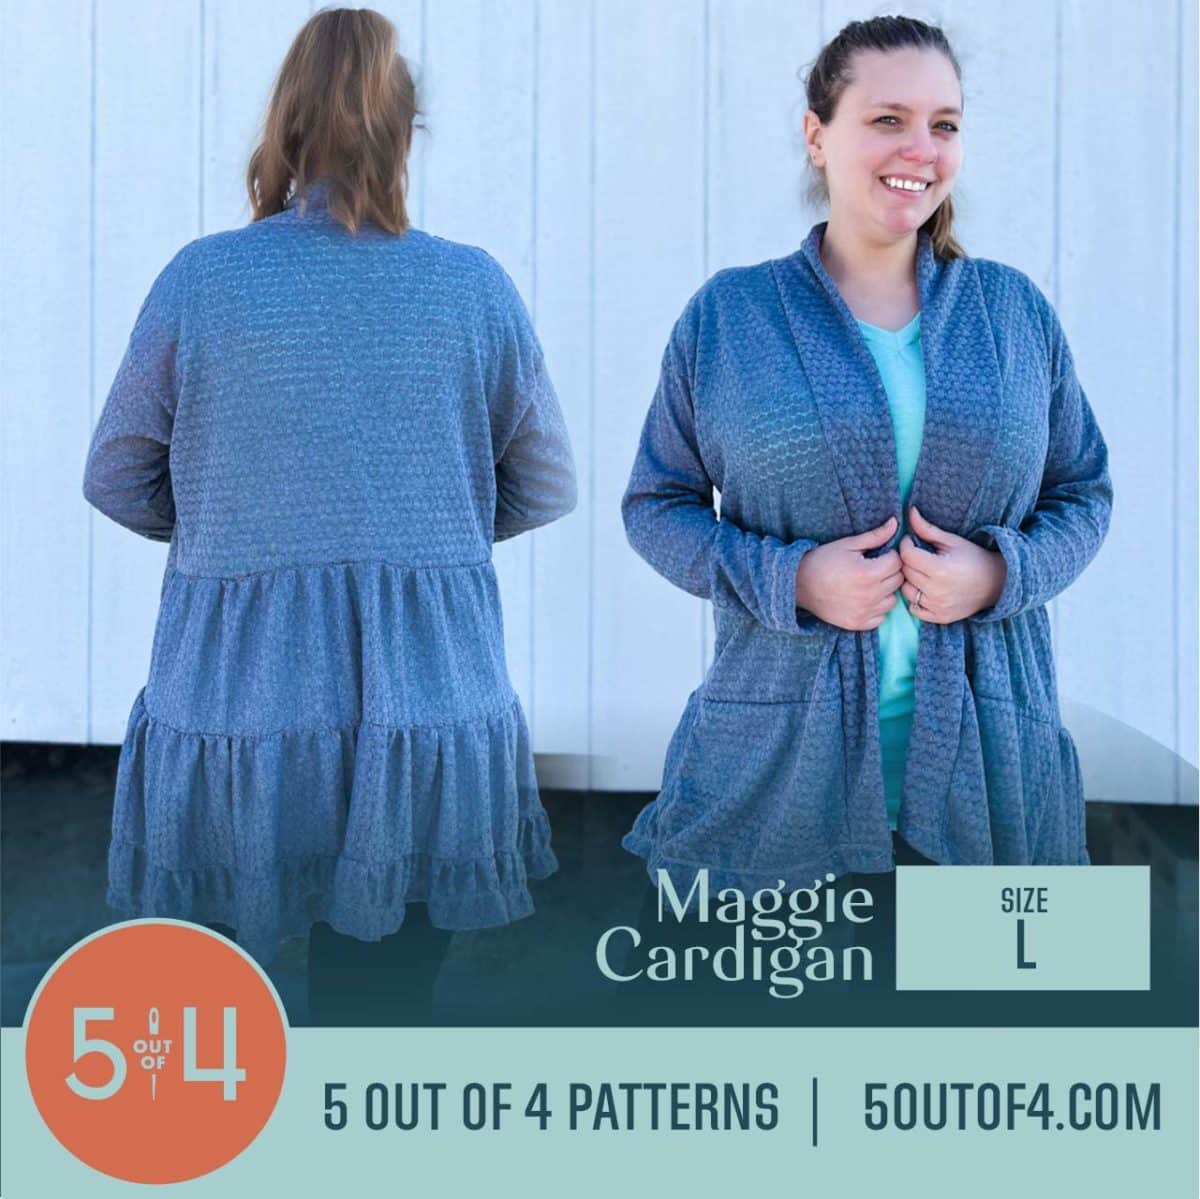 Maggie Cardigan - 5 out of 4 Patterns